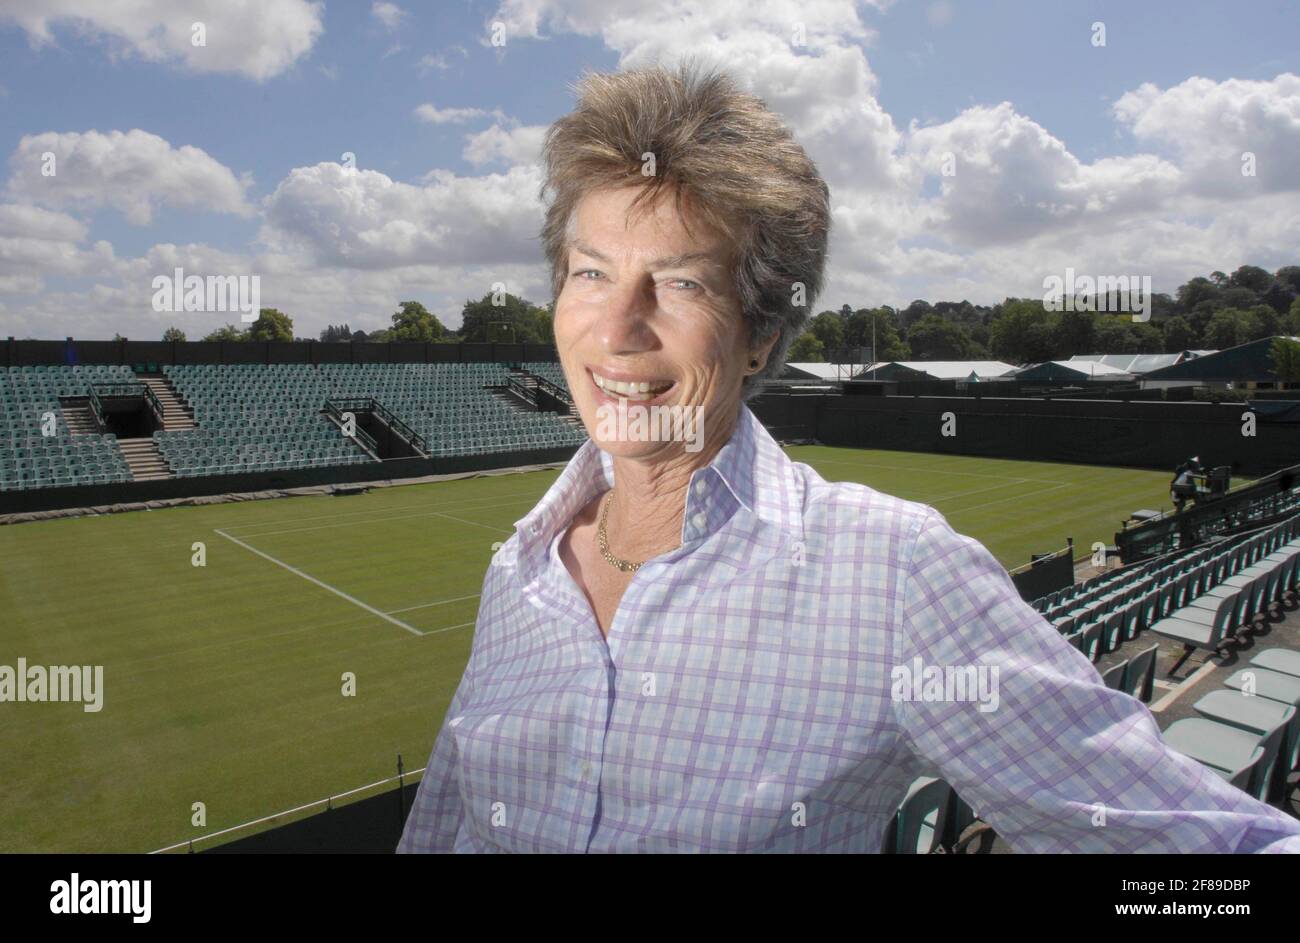 VIRGINIA WADE by No 2 COURT  23/6/07. PICTURE DAVID ASHDOWN Stock Photo